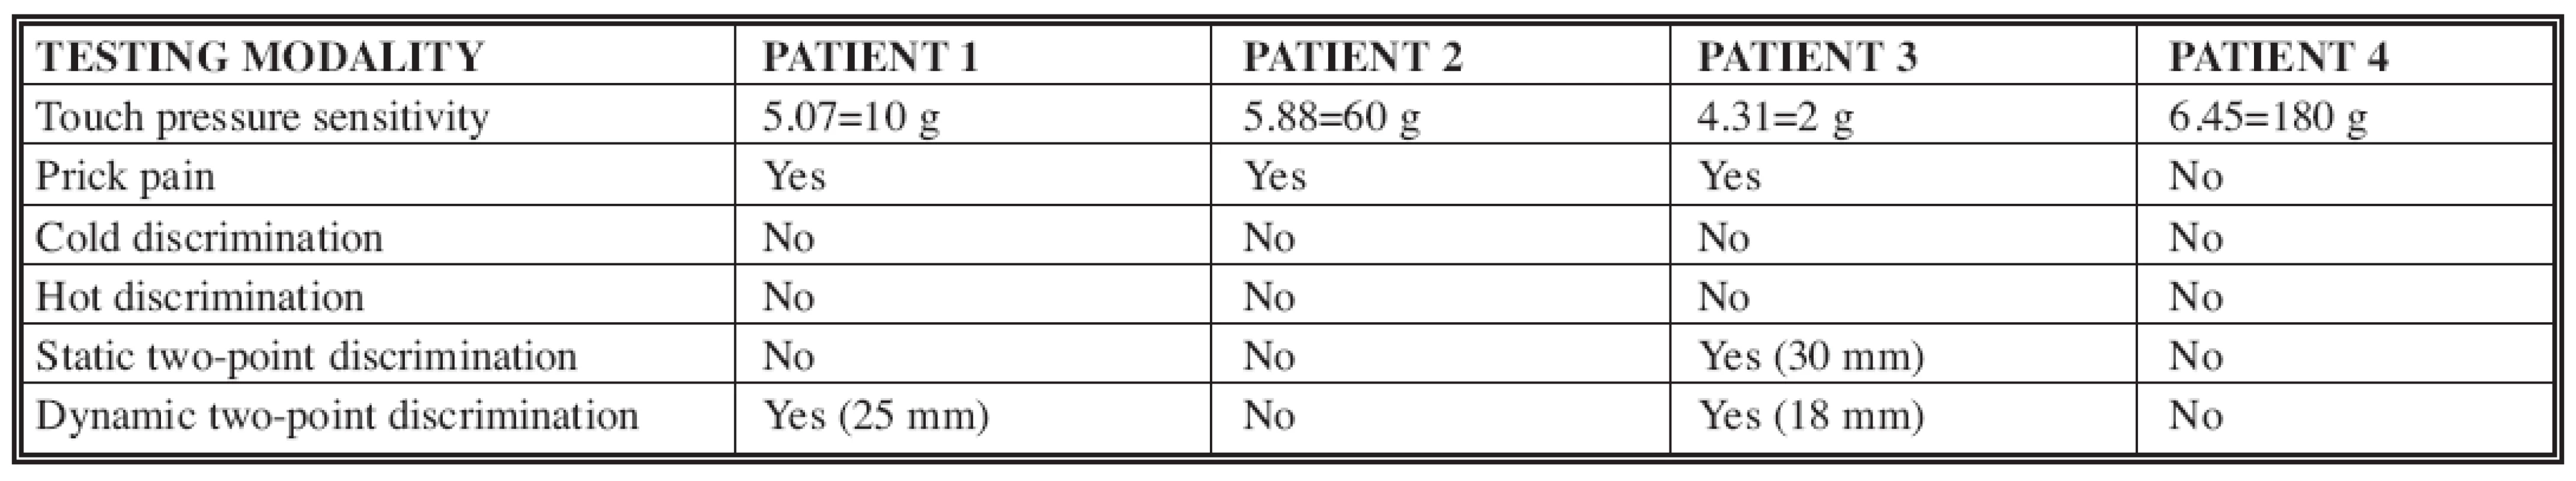 Results of testing in Patient 1–4